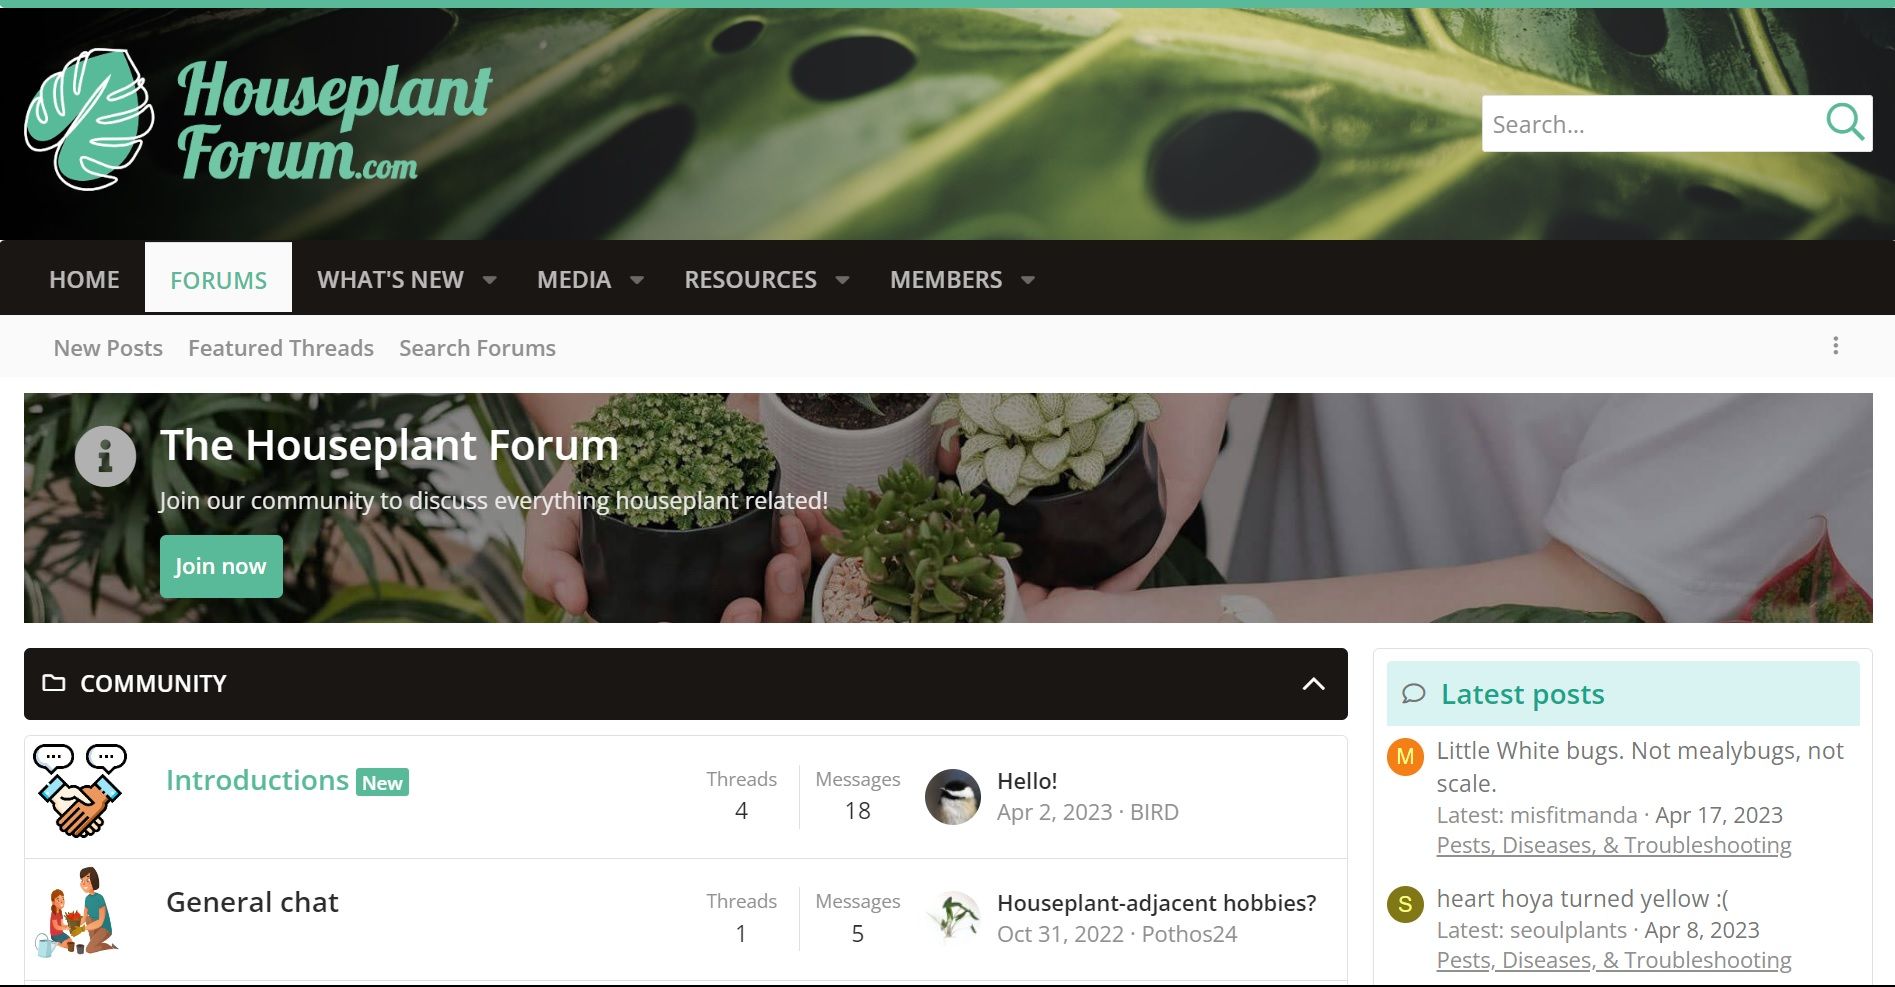 Forum page on Houseplant Forum site